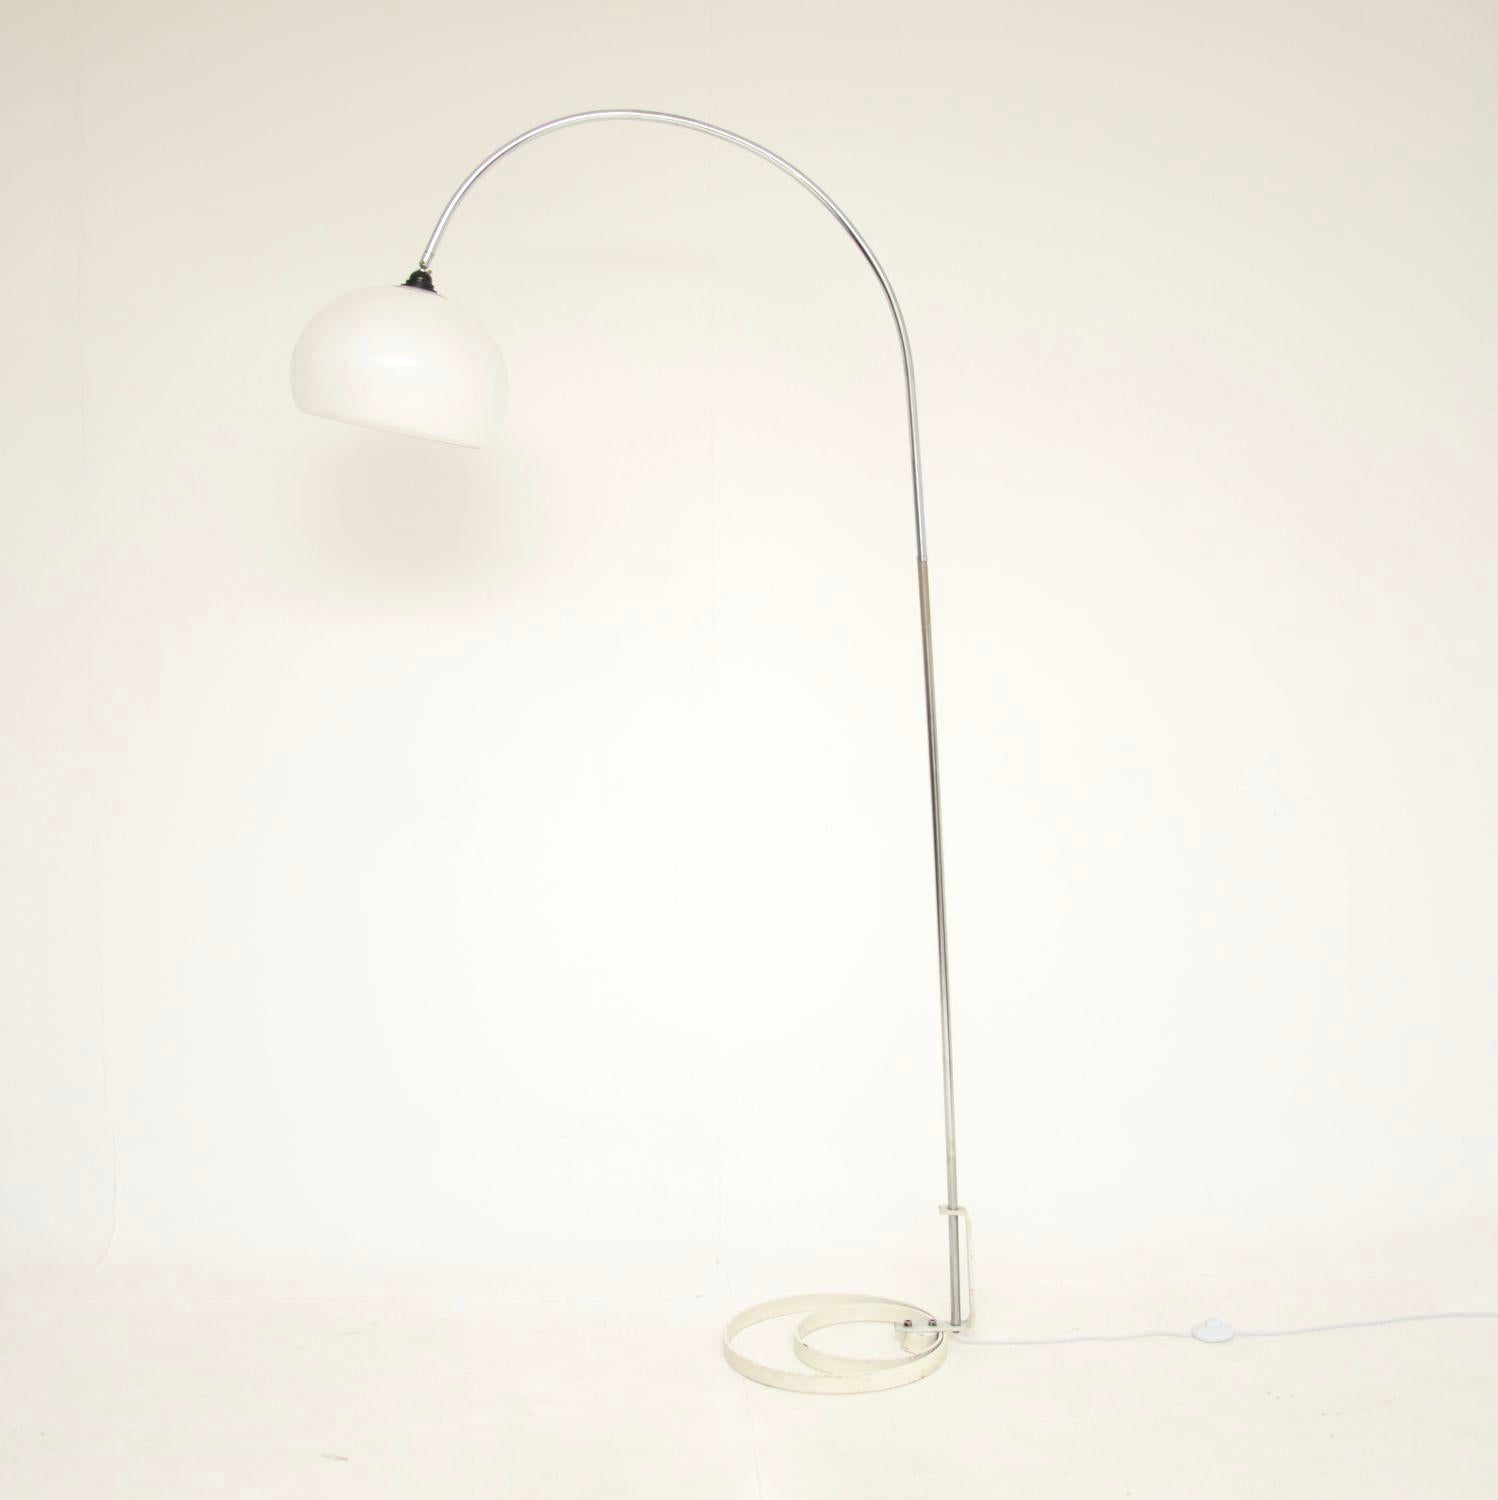 A very stylish vintage arc lamp in chrome, with a painted white steel base and a white acrylic shade.

This is a great size and has a lovely design, with an unusual design to the base. The lamp shade can be tilted to adjust the angle of lighting,